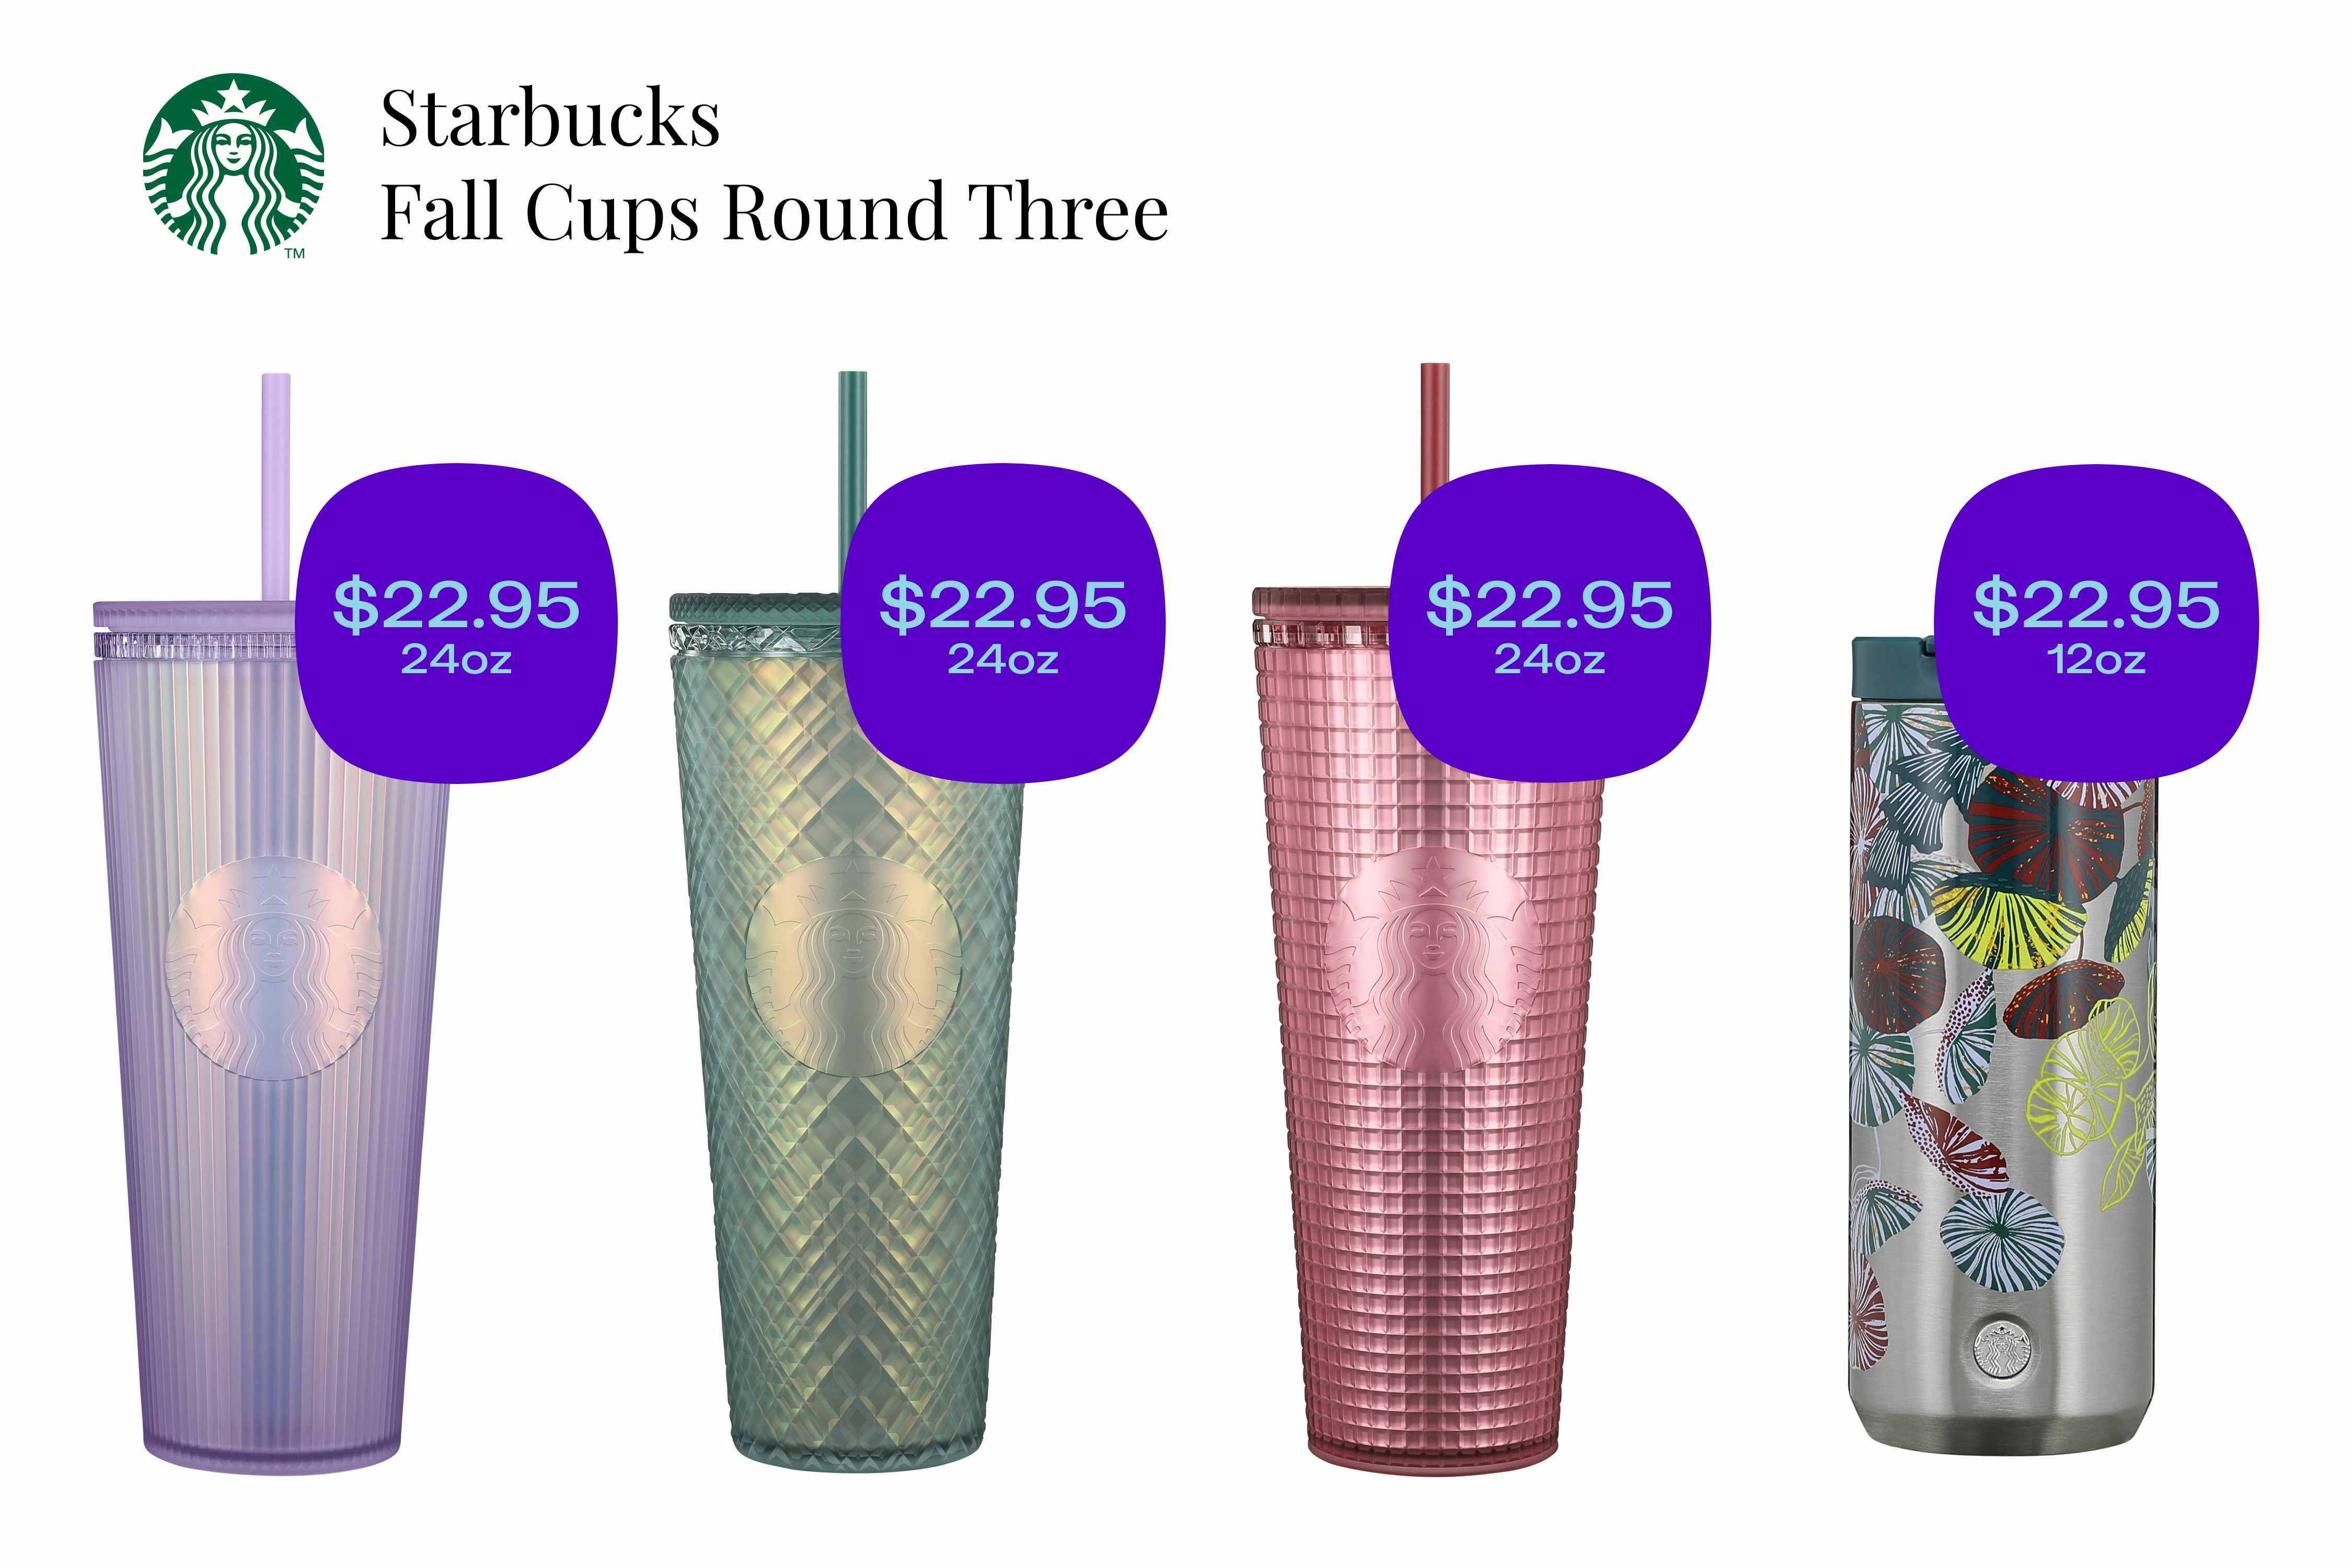 https://prod-cdn-thekrazycouponlady.imgix.net/wp-content/uploads/2022/09/starbucks-fall-cups-round-three-1-1695916692-1695916694.png?auto=format&fit=fill&q=25